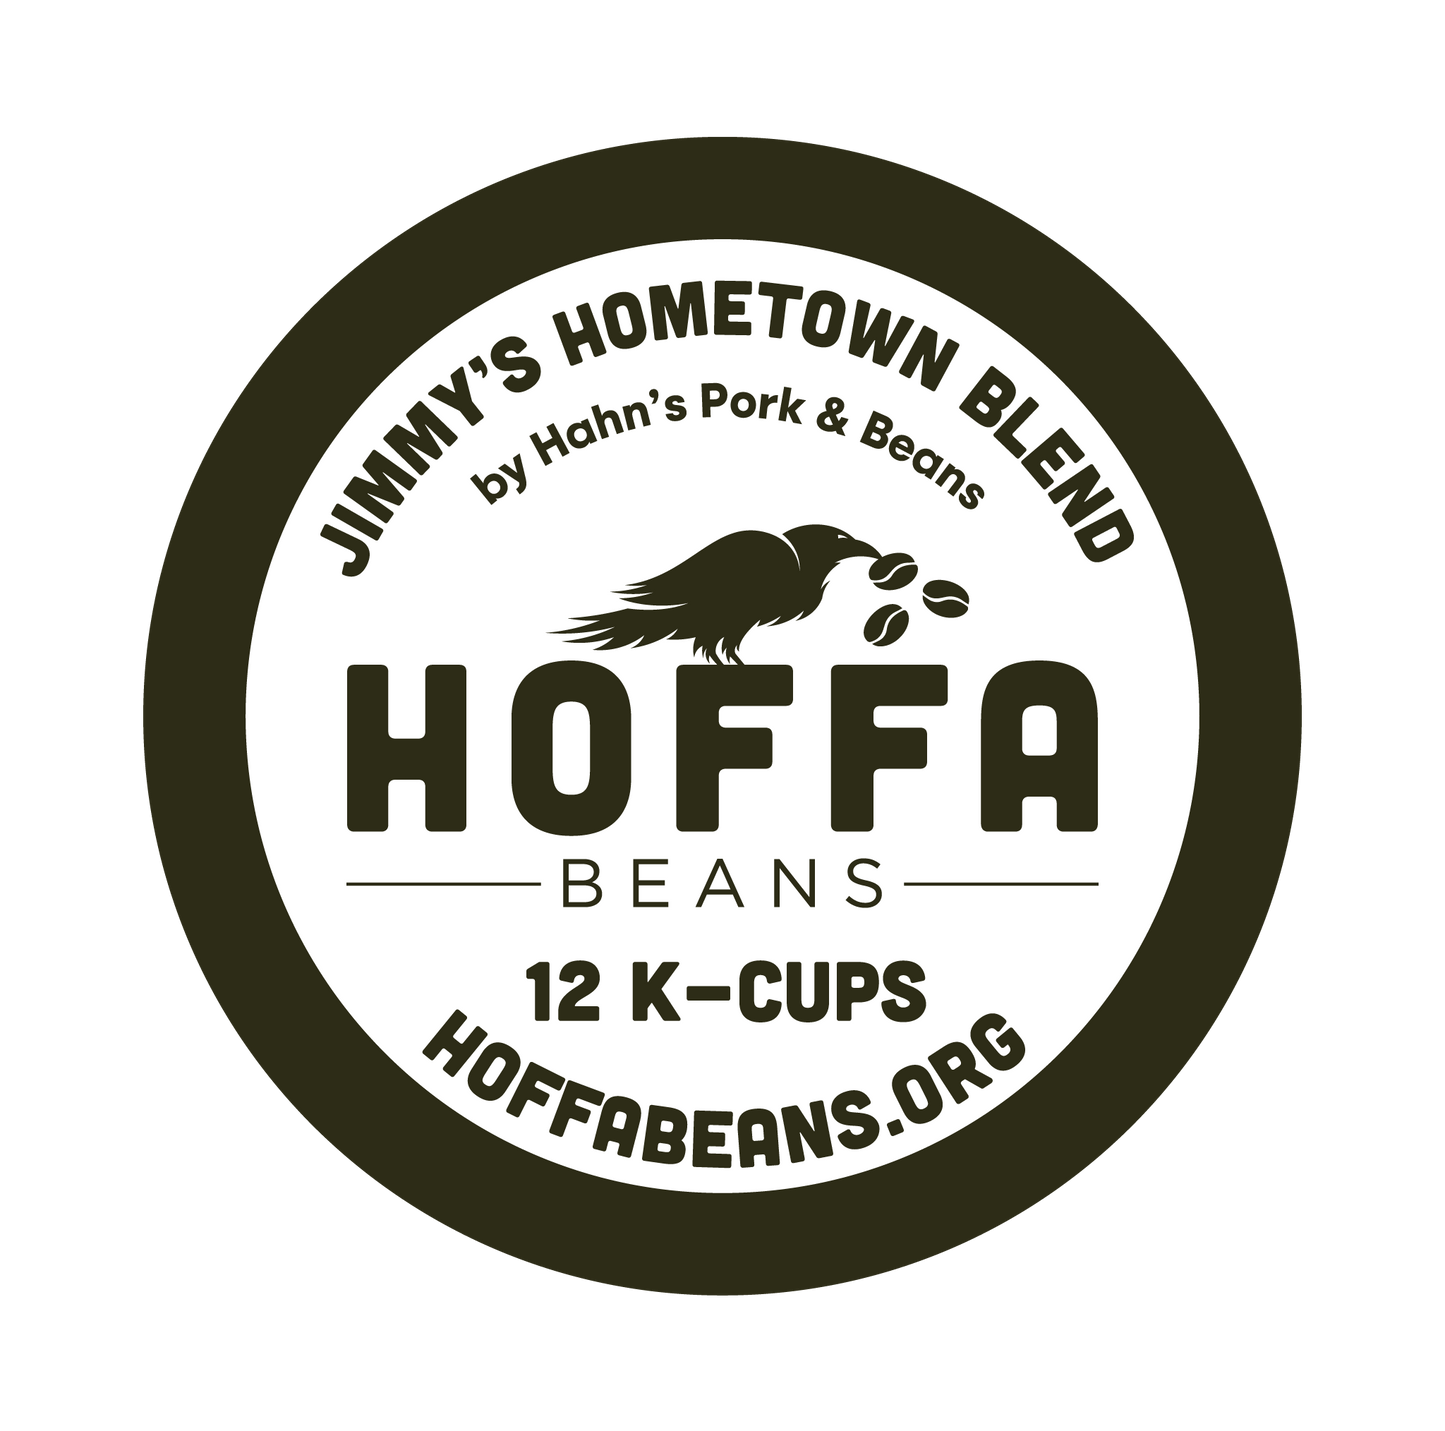 12 pack (k-cups) - Jimmy's Hometown Blend